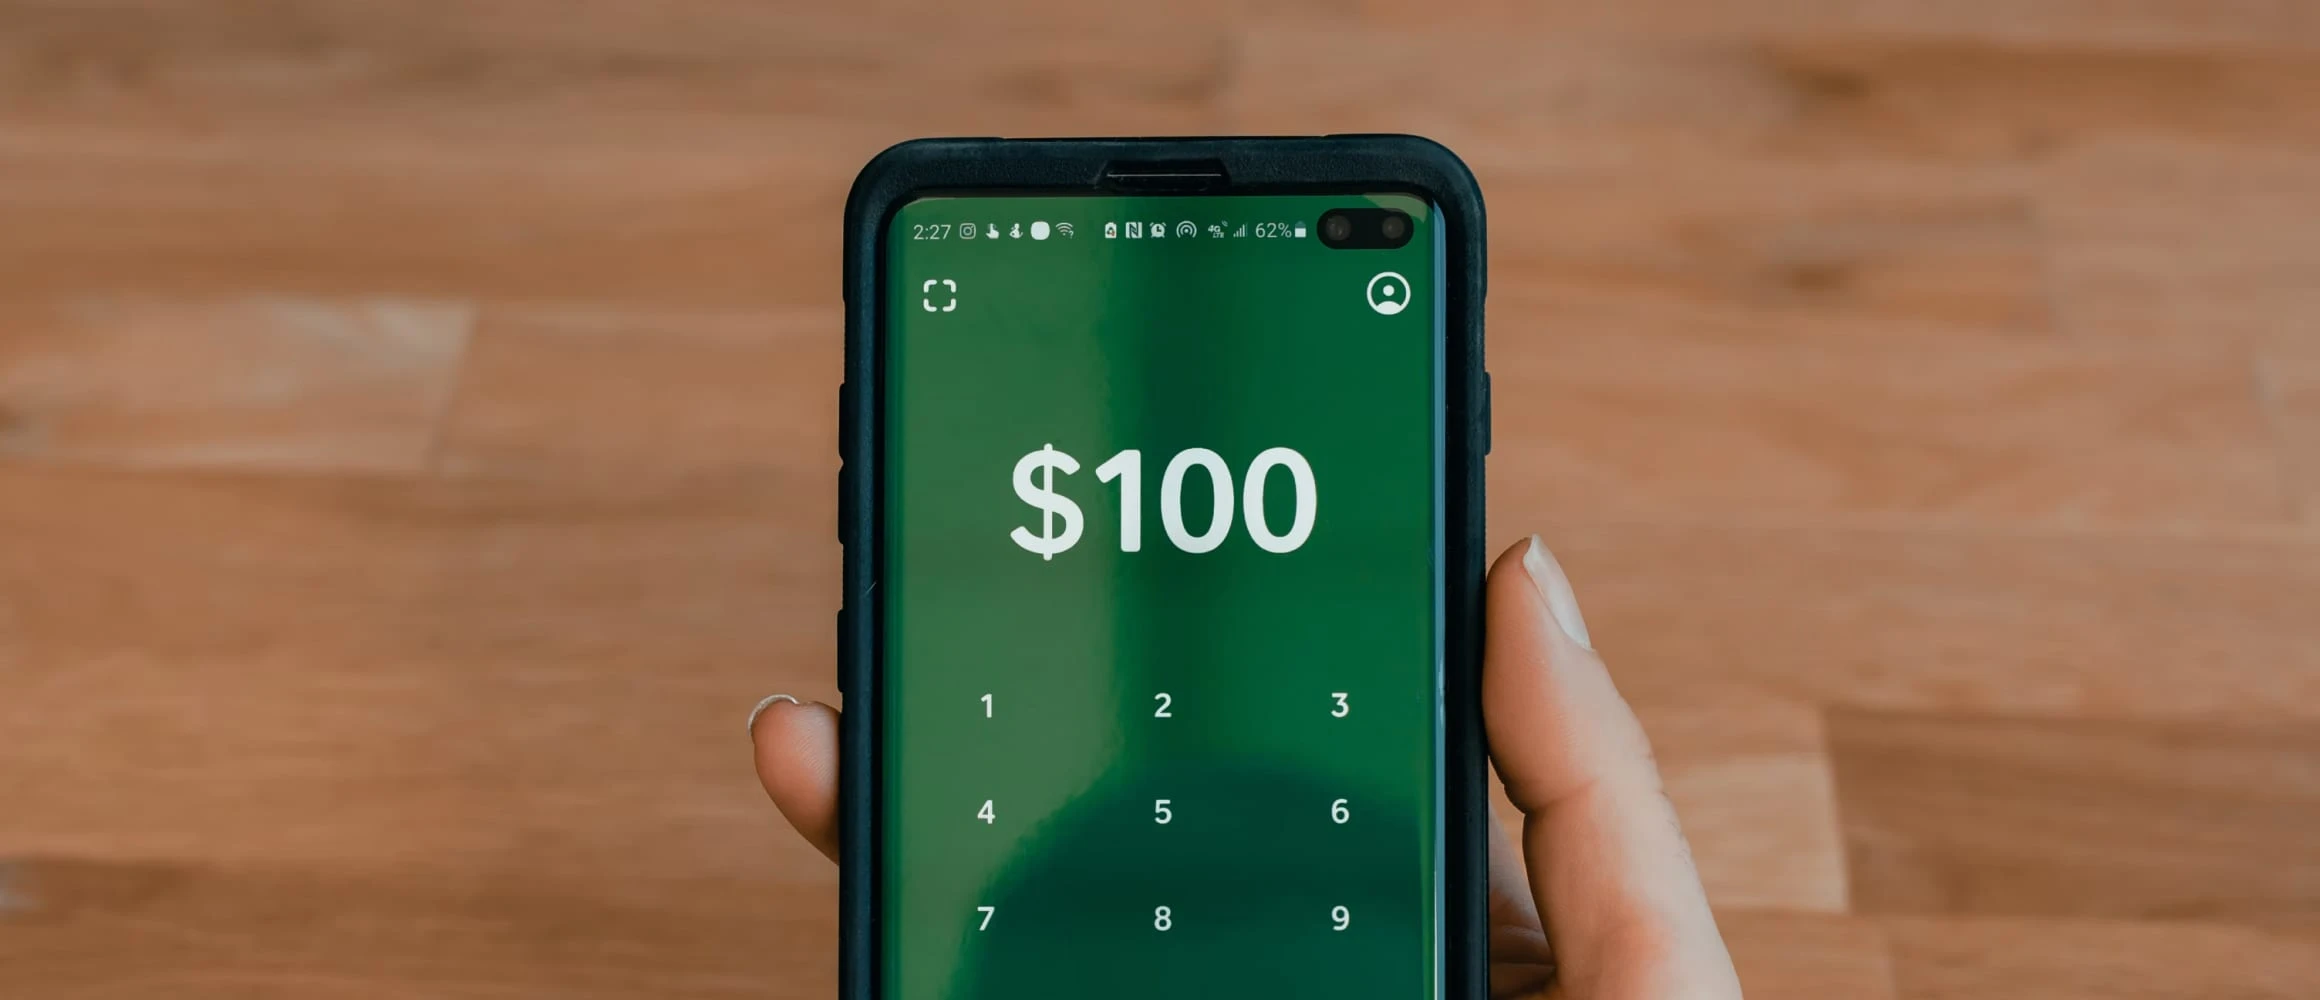 A woman holding a phone showing the Cash App